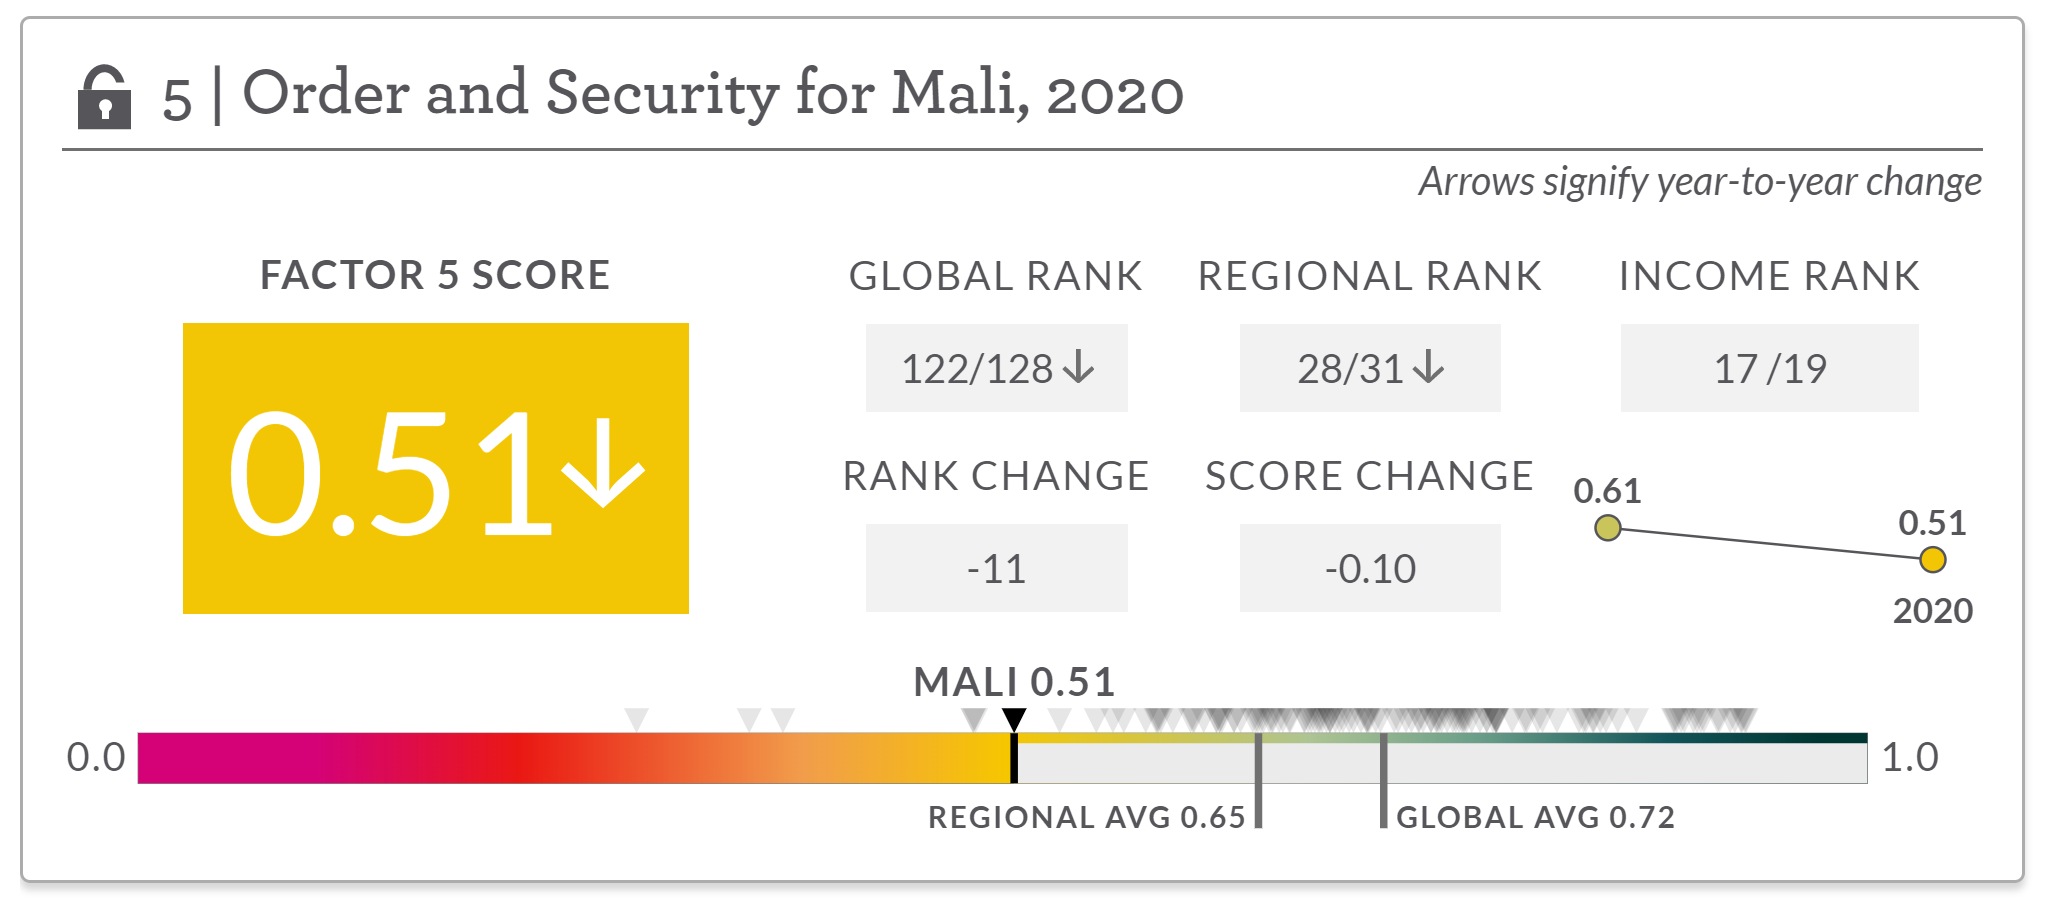 WJP Rule of Law Index data on access to justice in Mali